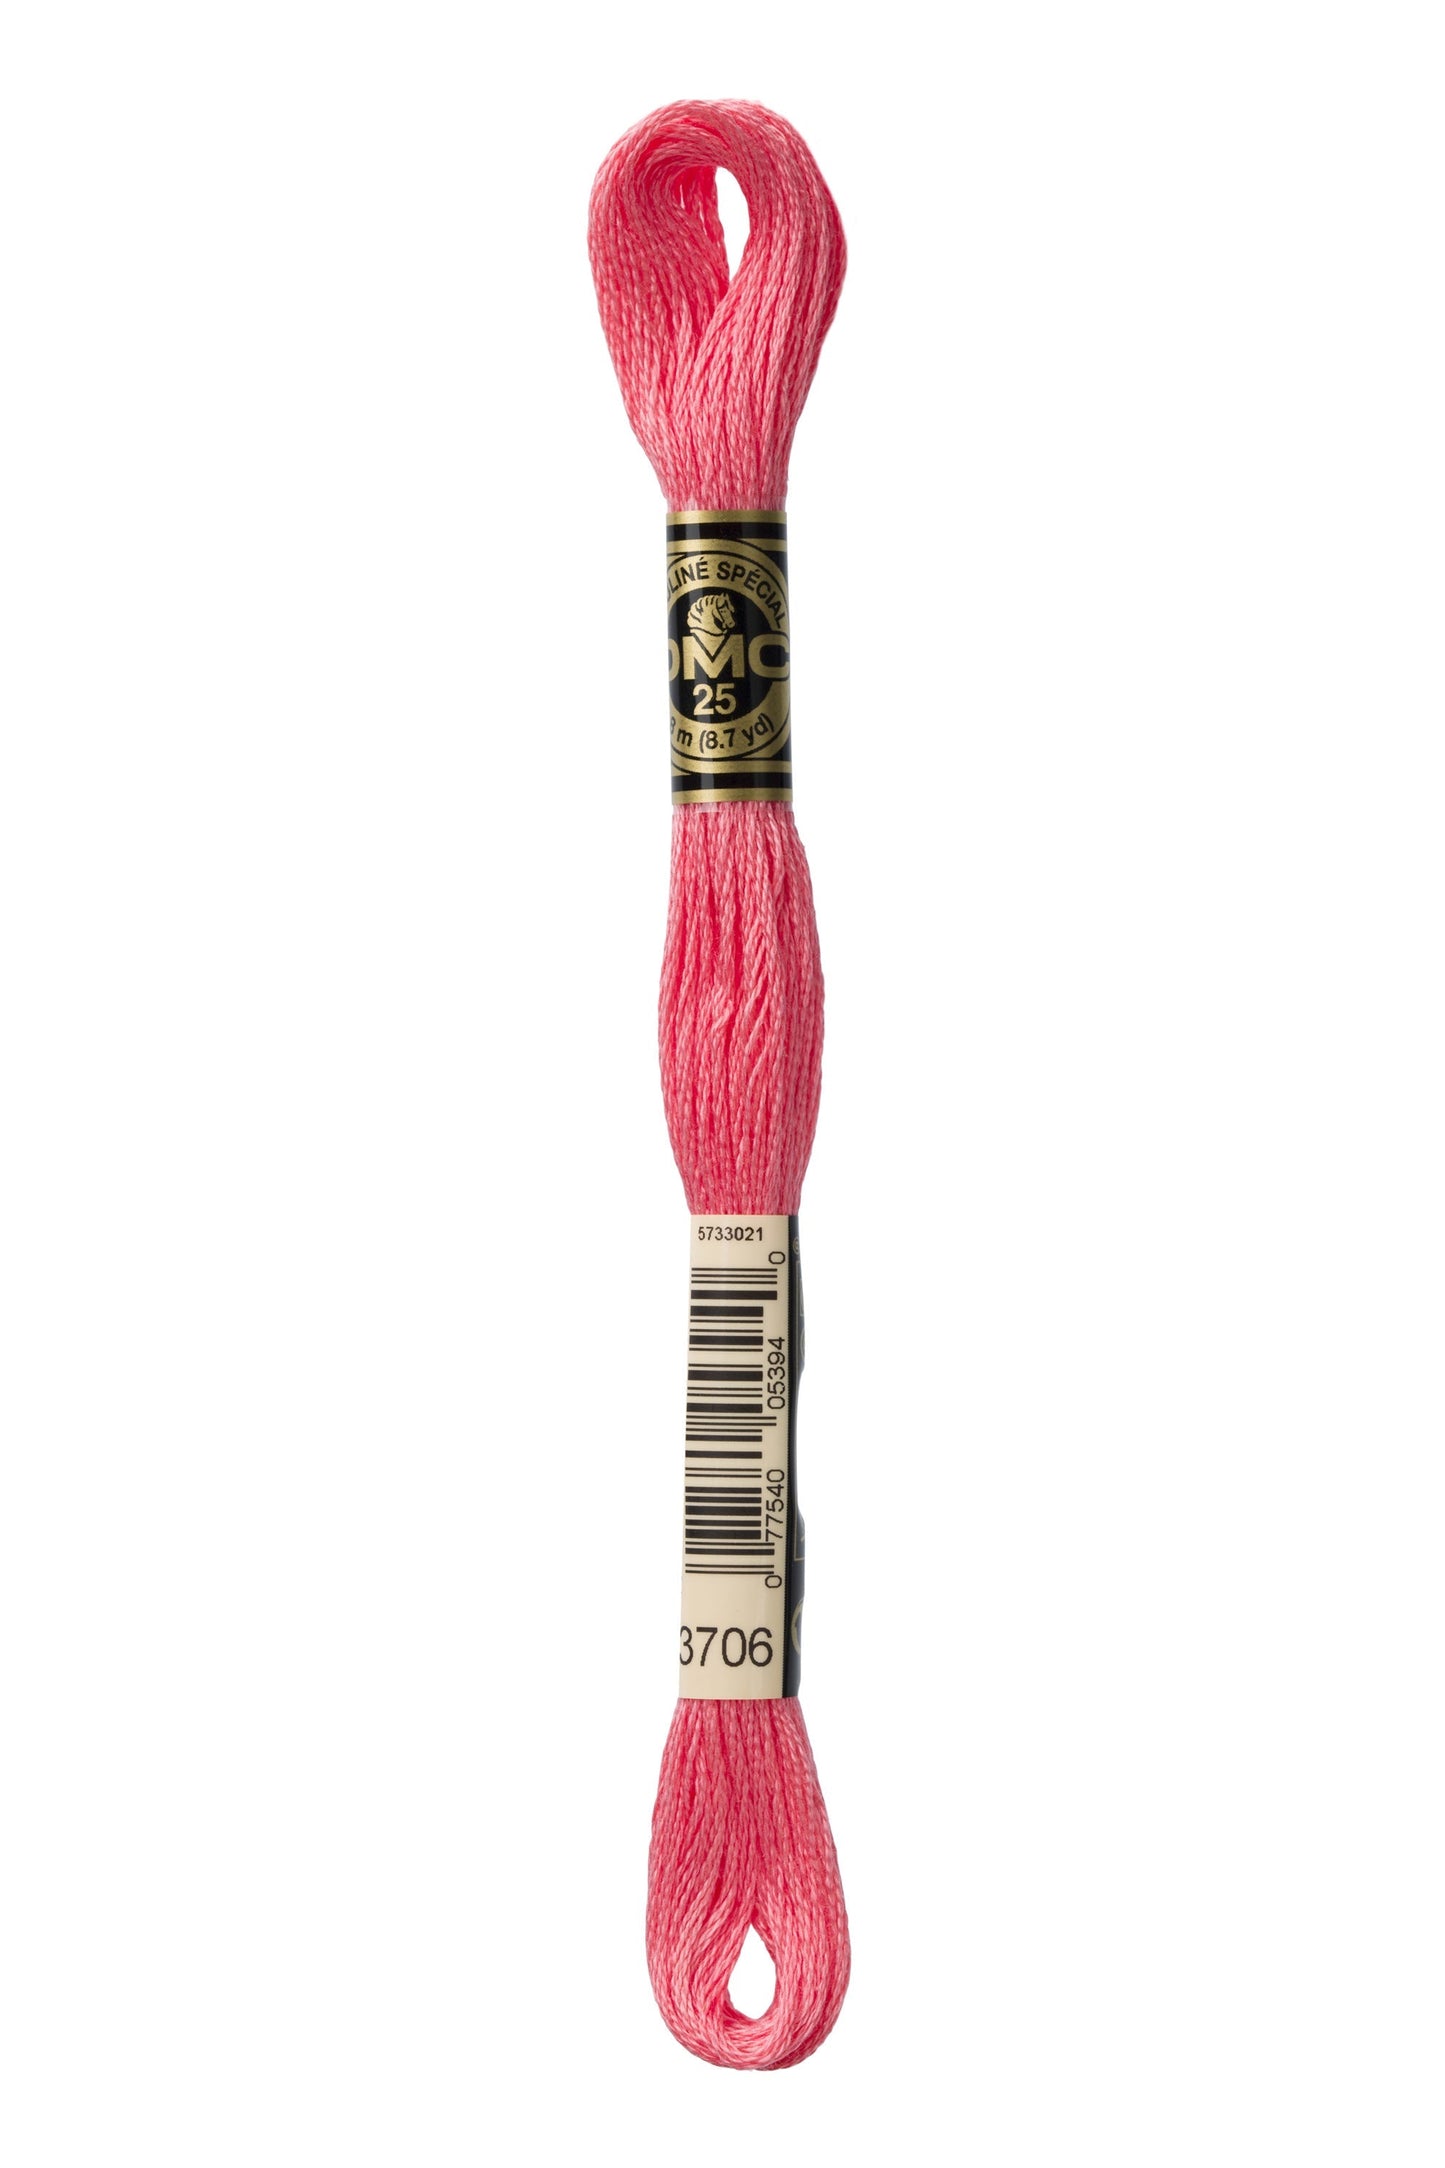 Six-Strand Embroidery Floss - 3706 (Flamingo)-Embroidery Thread-Wild and Woolly Yarns